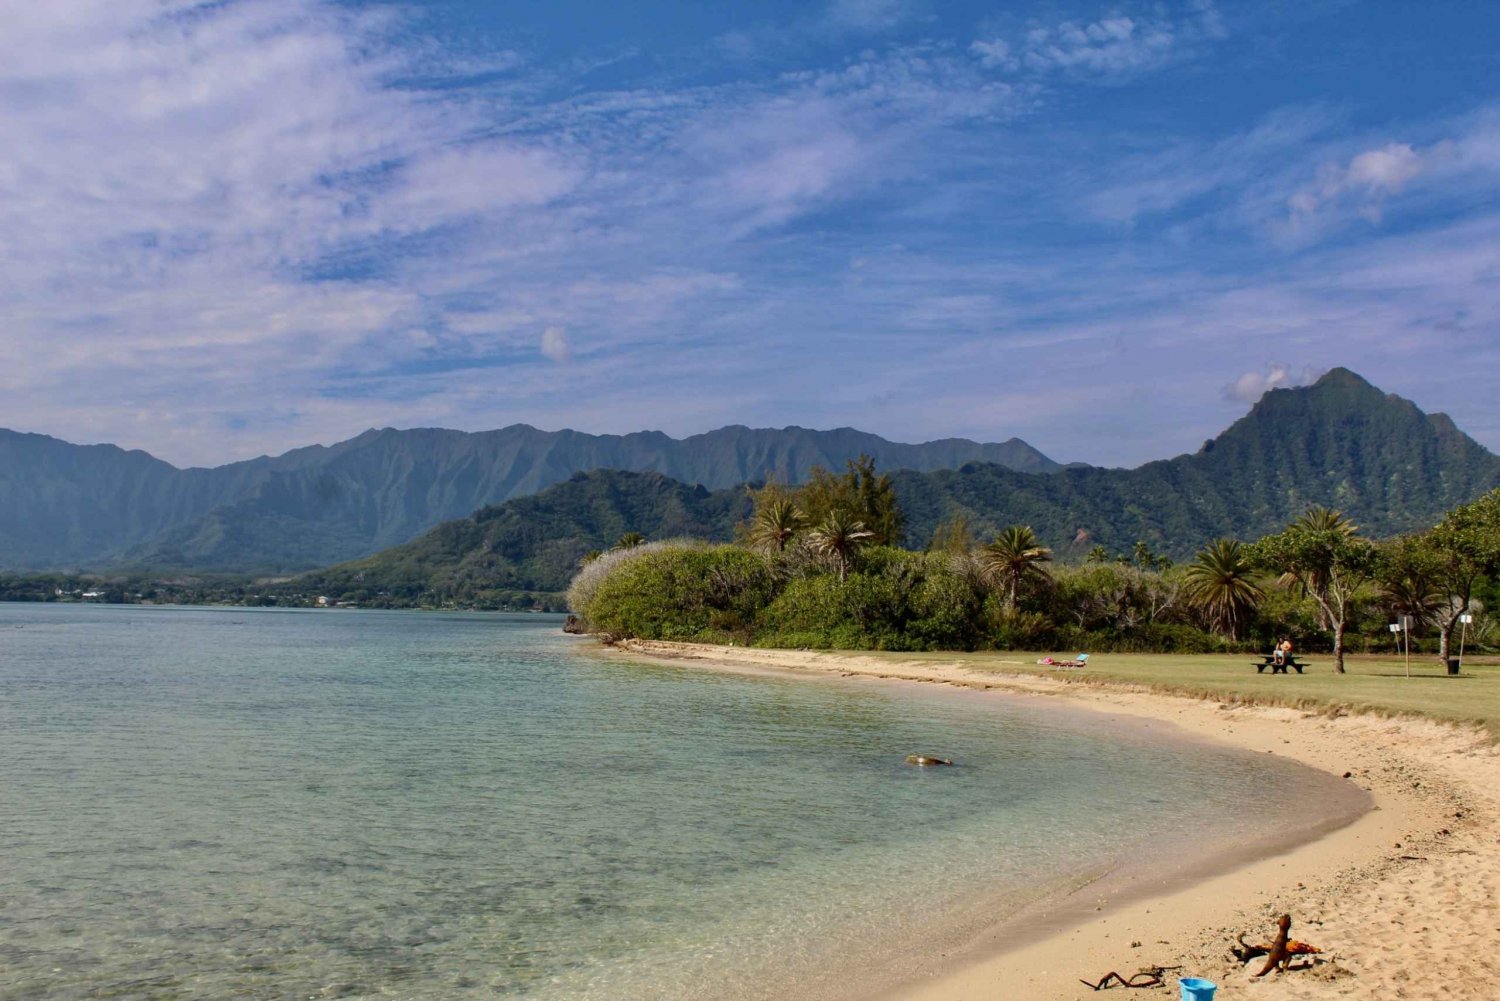 From Honolulu: 20 Exciting Sites North Shore of Oahu Tour